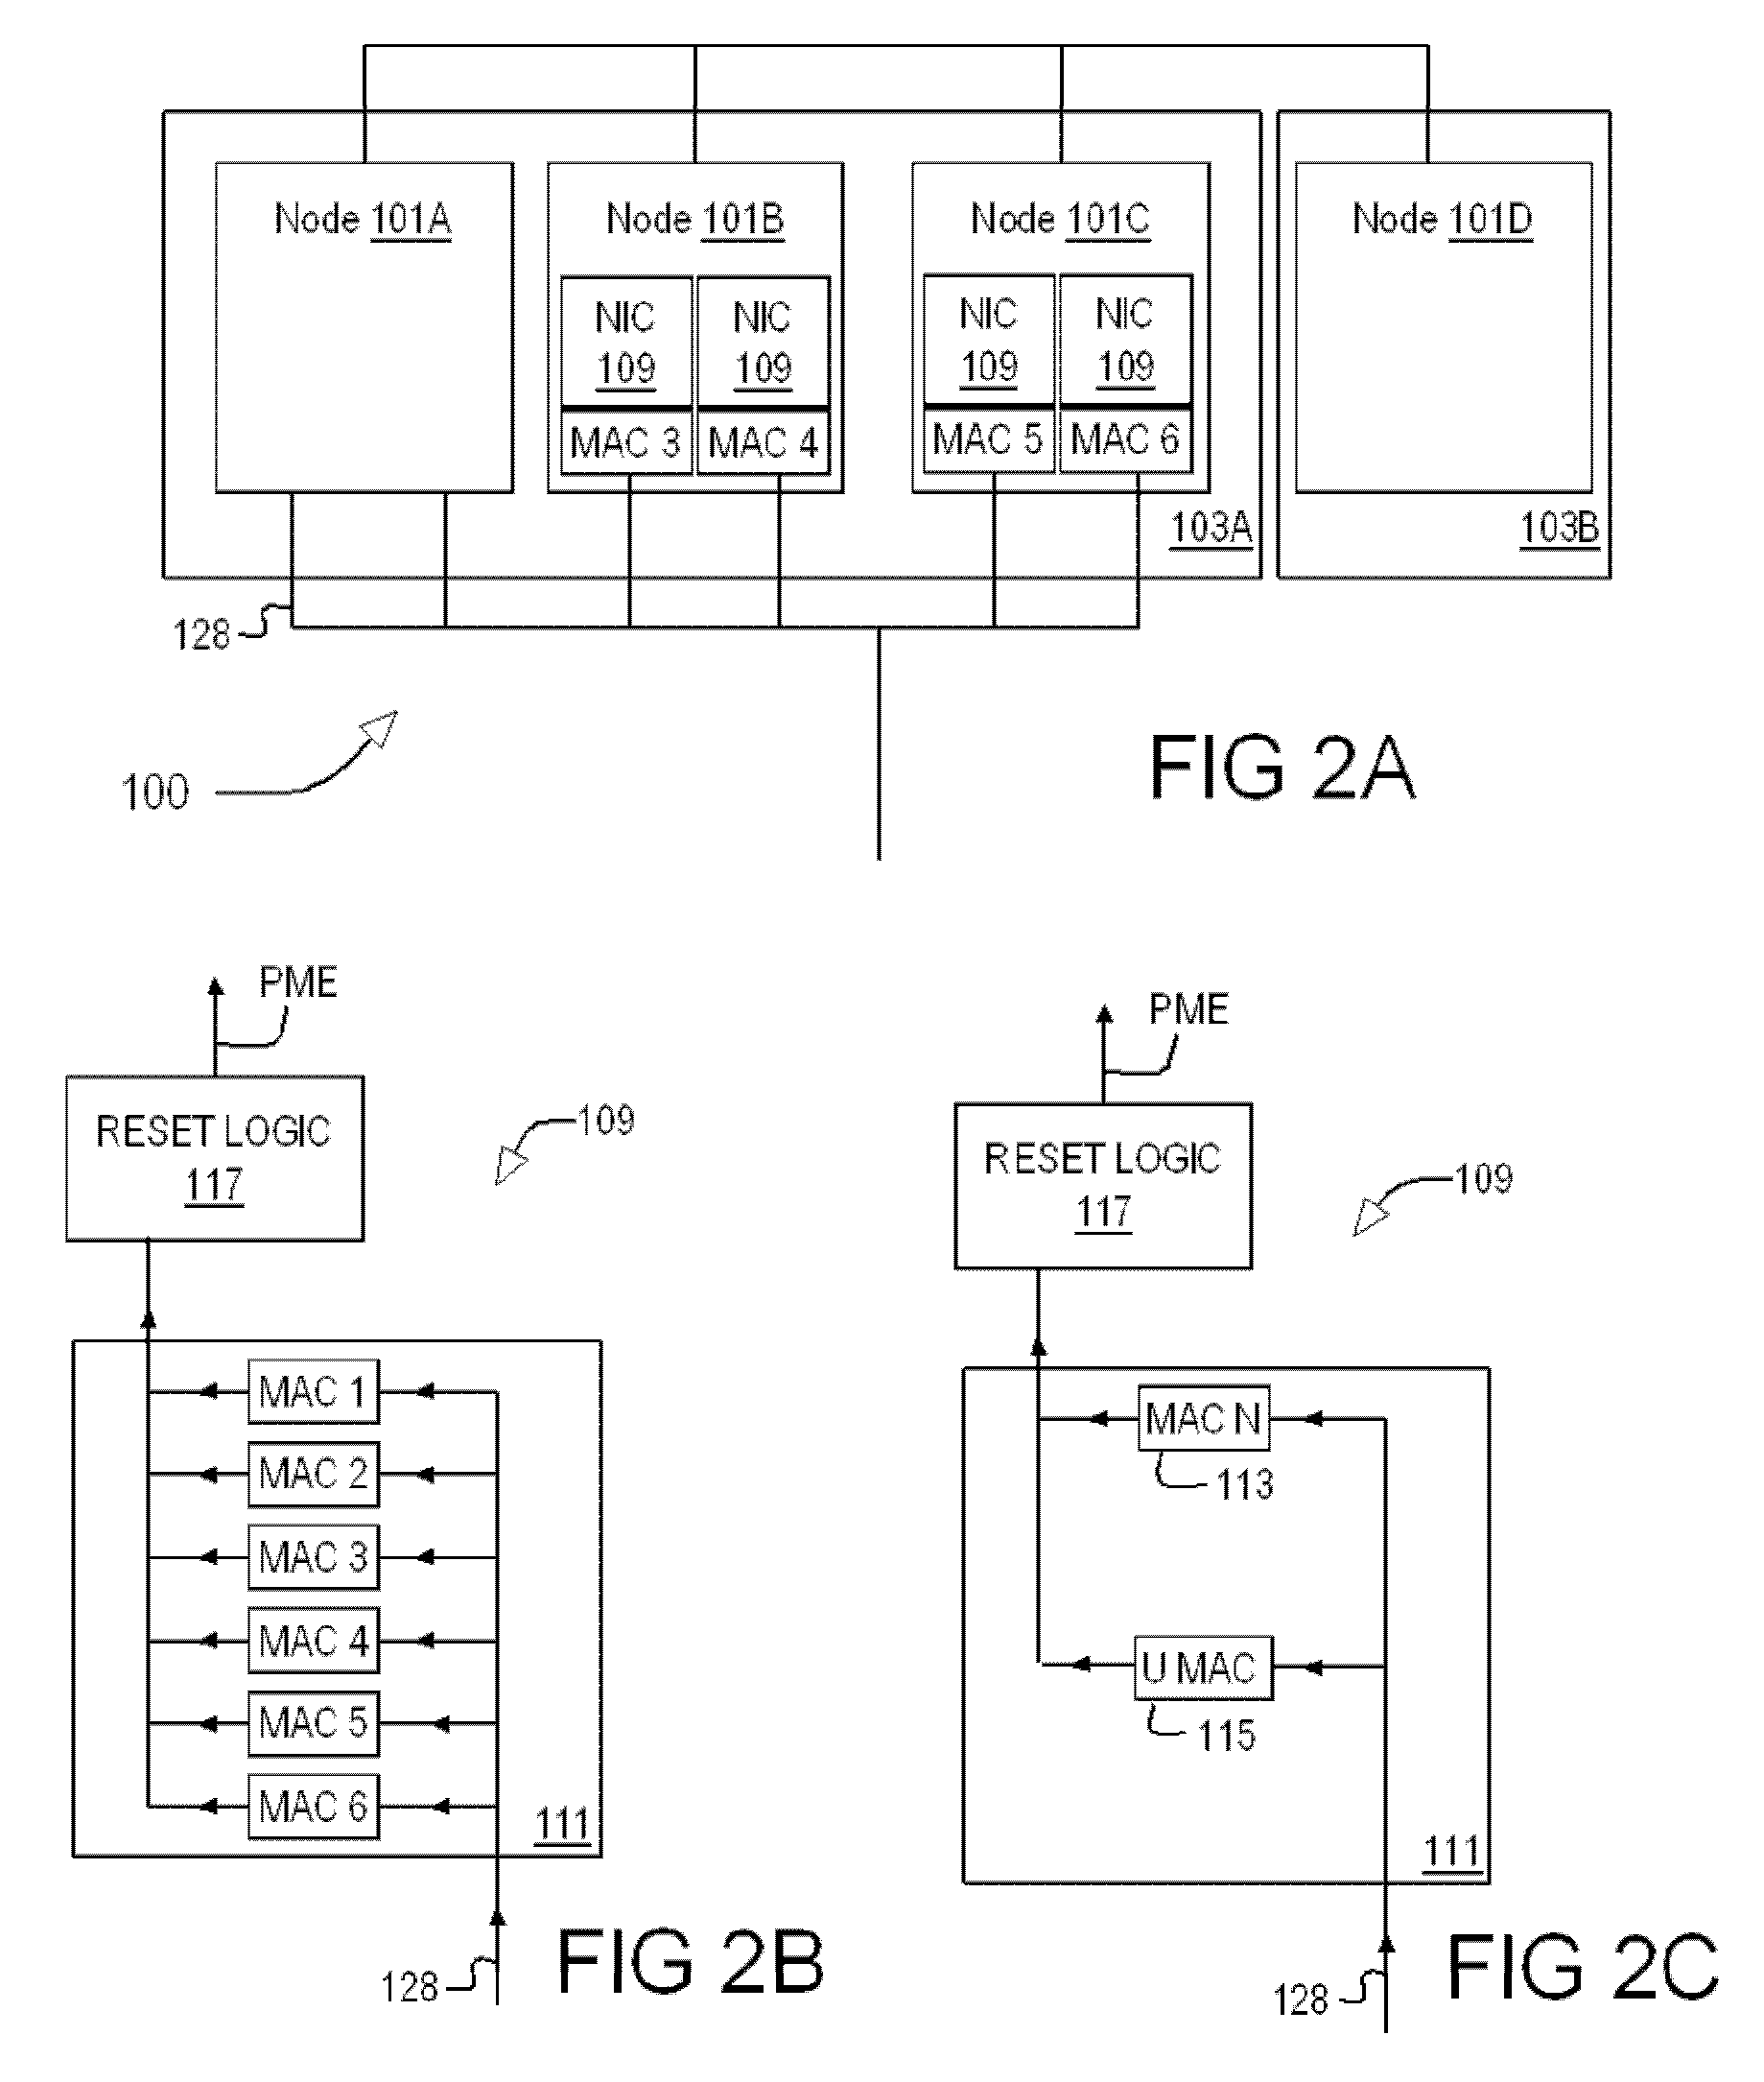 Remote power control in a multi-node, partitioned data processing system via network interface cards